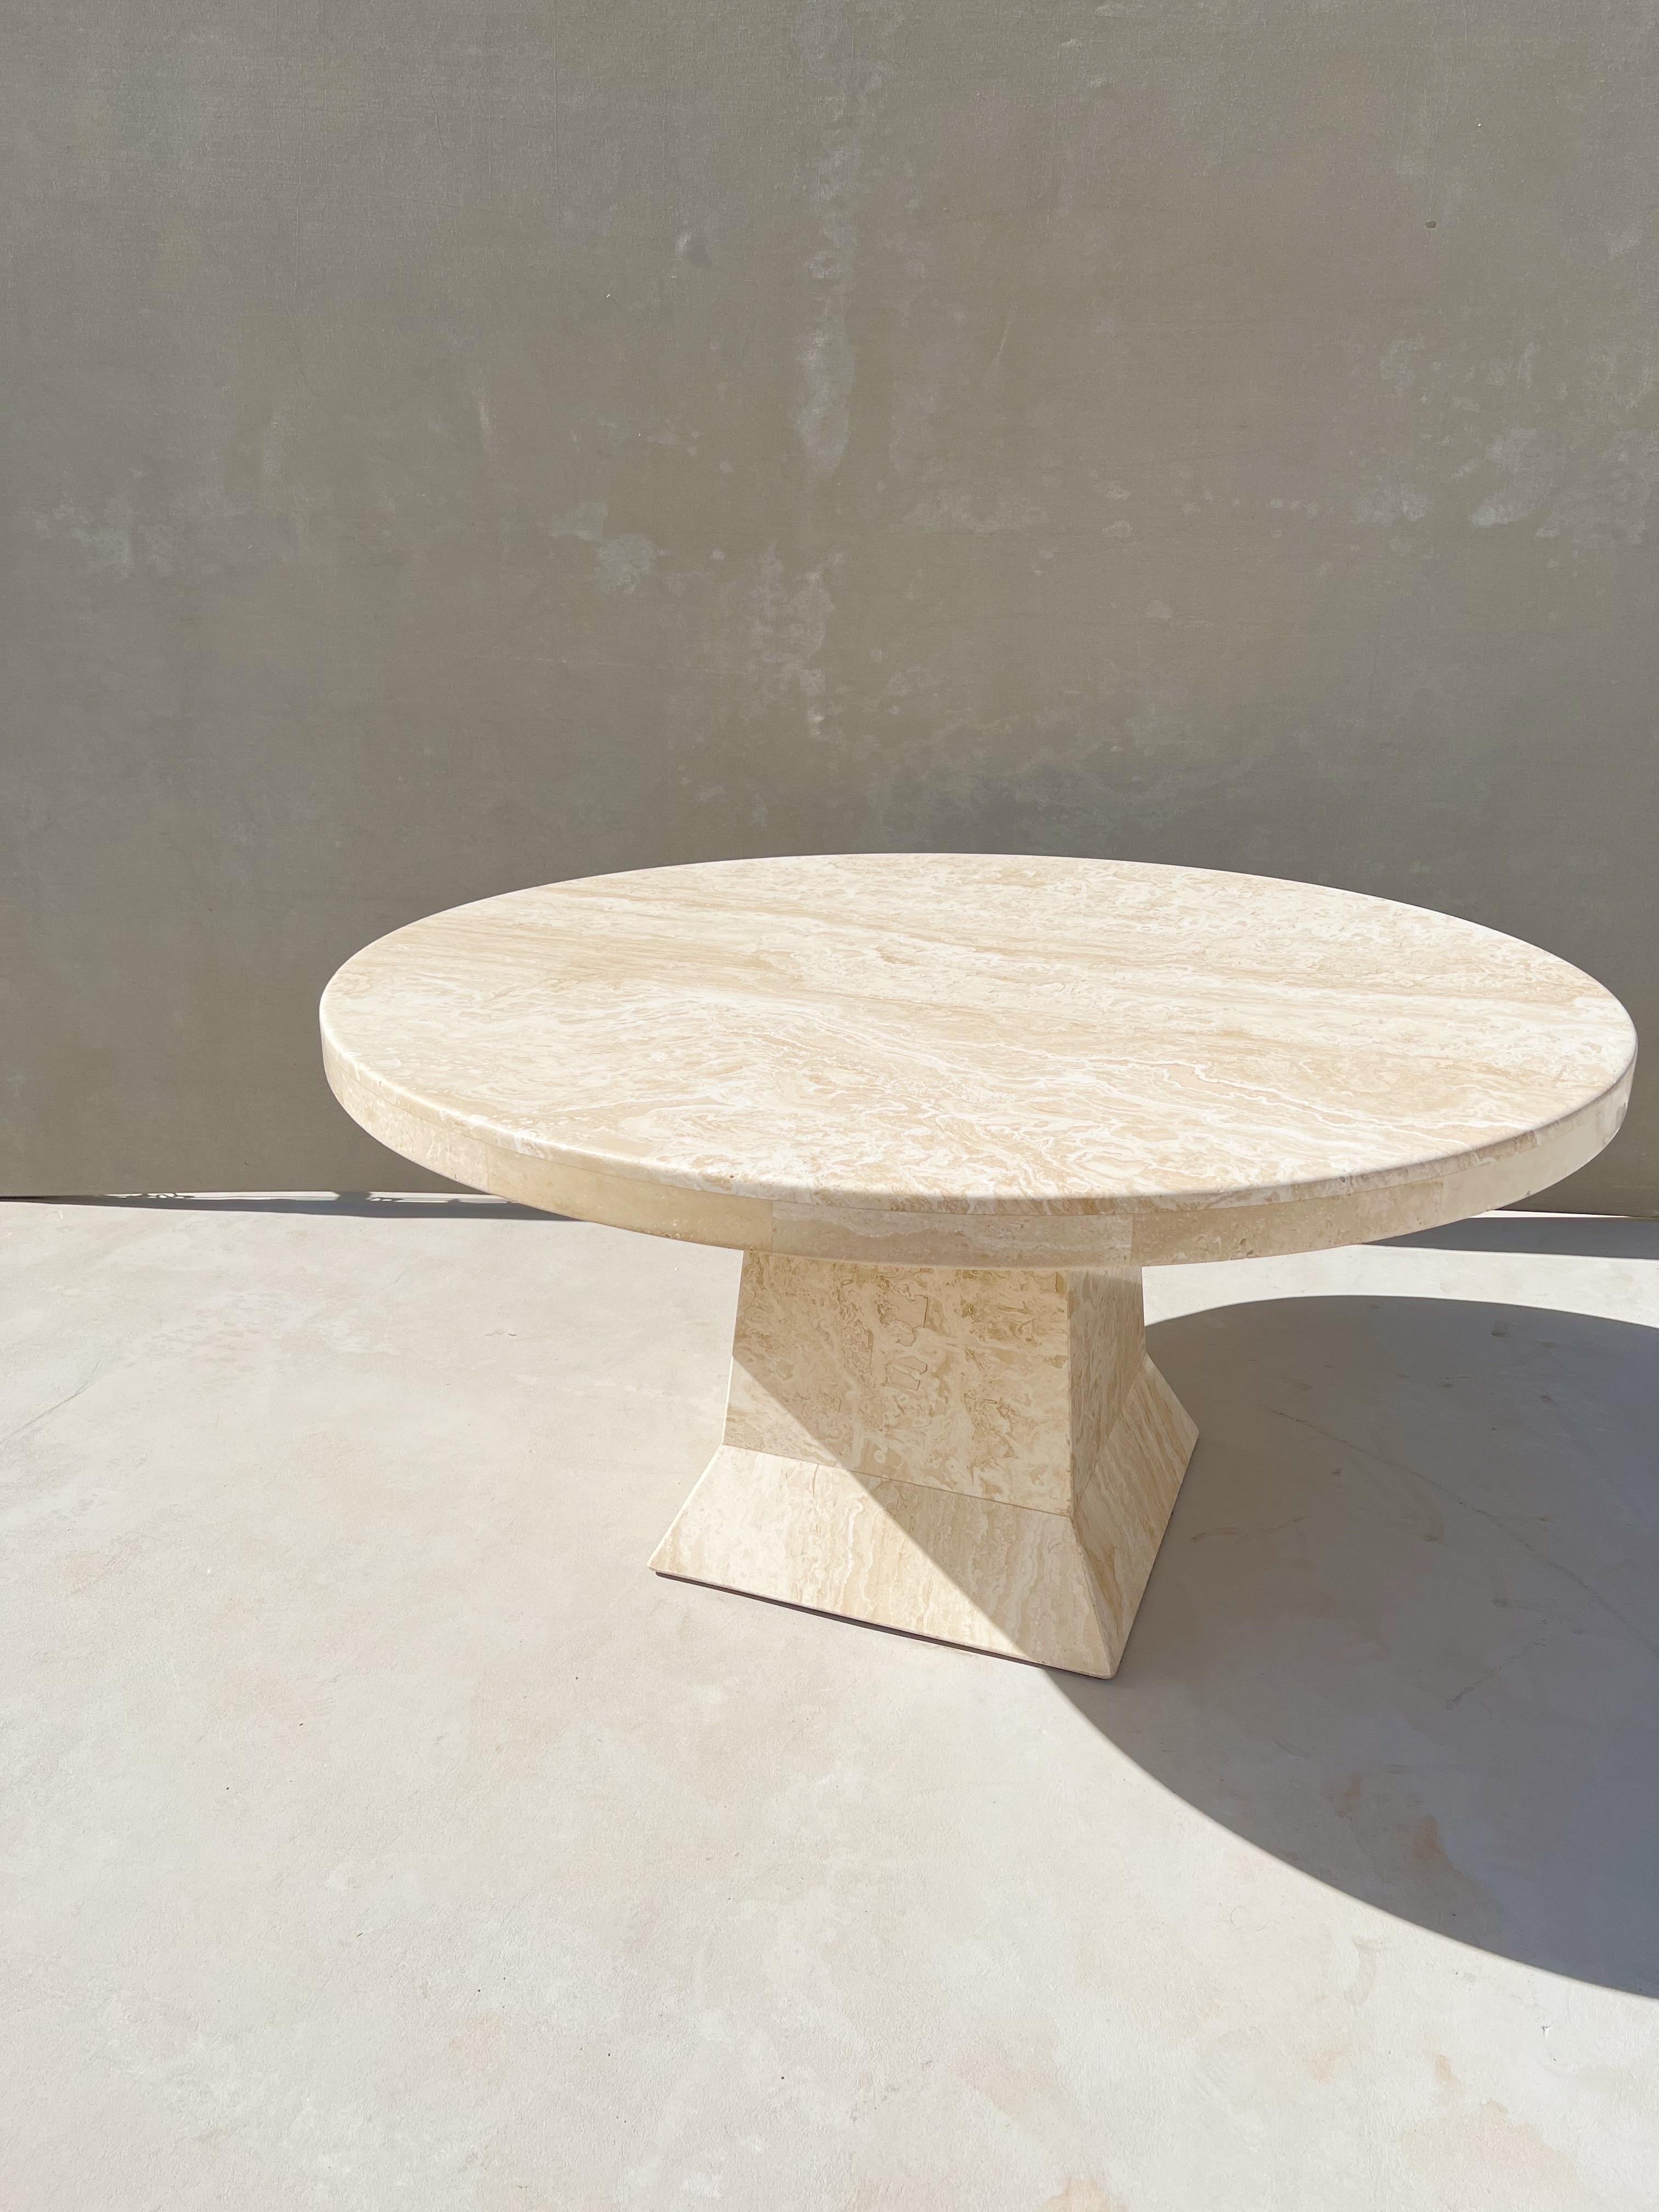 Vintage Modern Italian Travertine Round Dining Table with a Sculptural Base 11